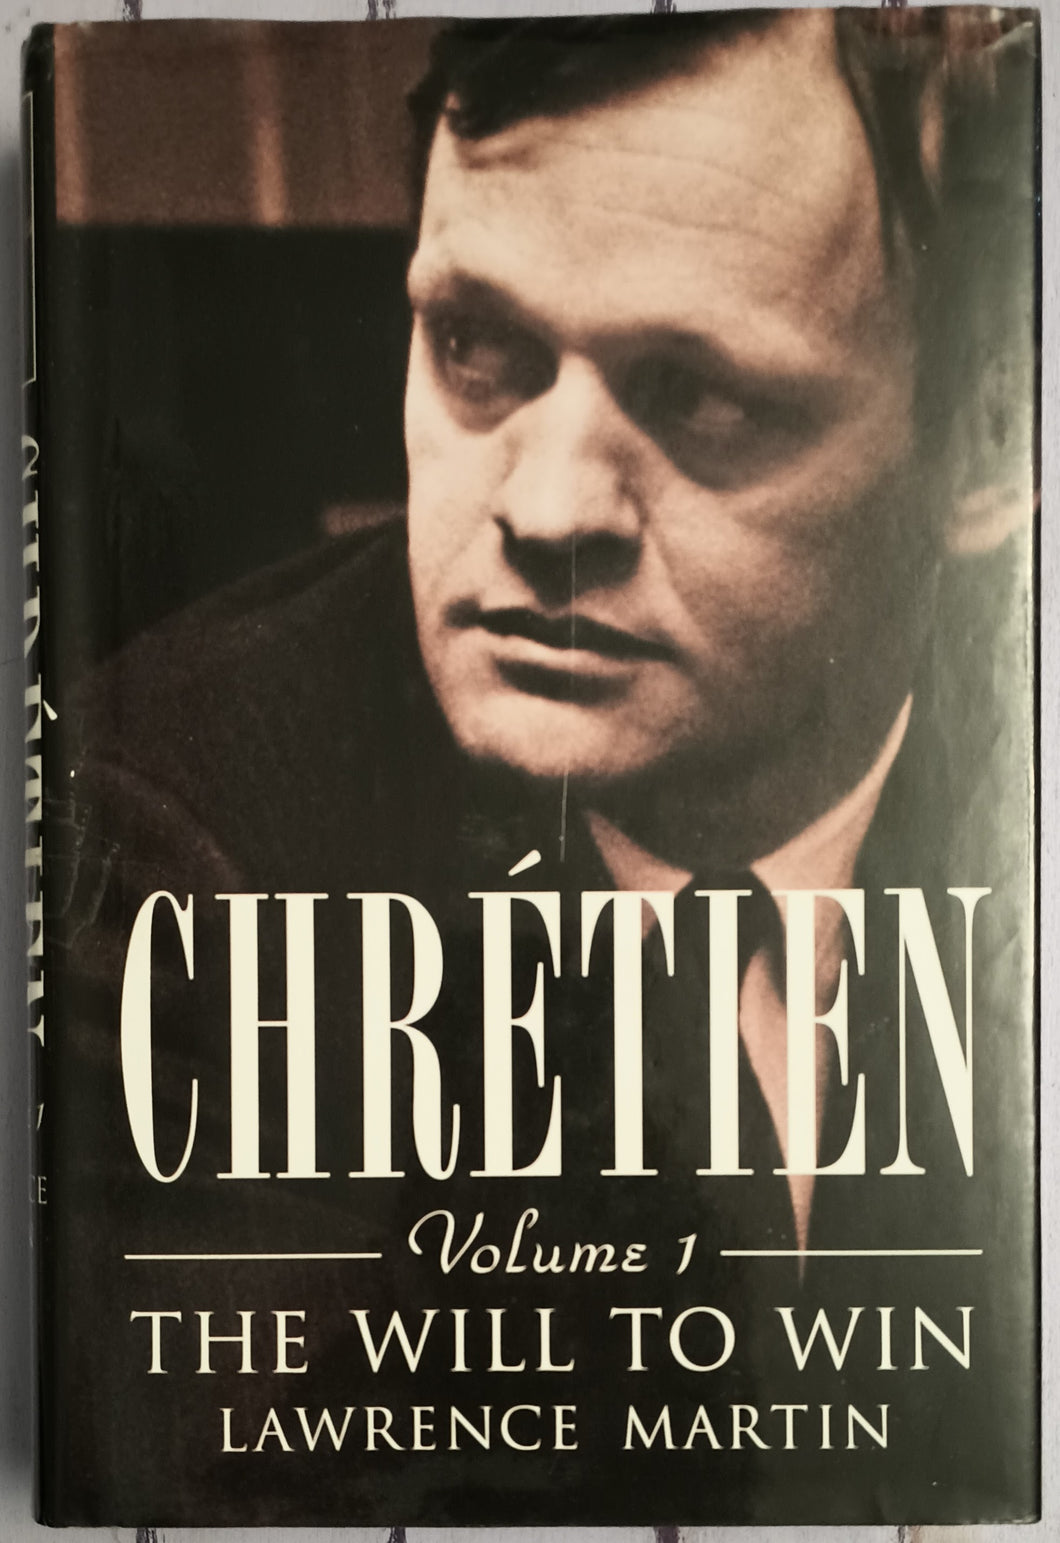 Chrétien - Volume 1 The Will to Win